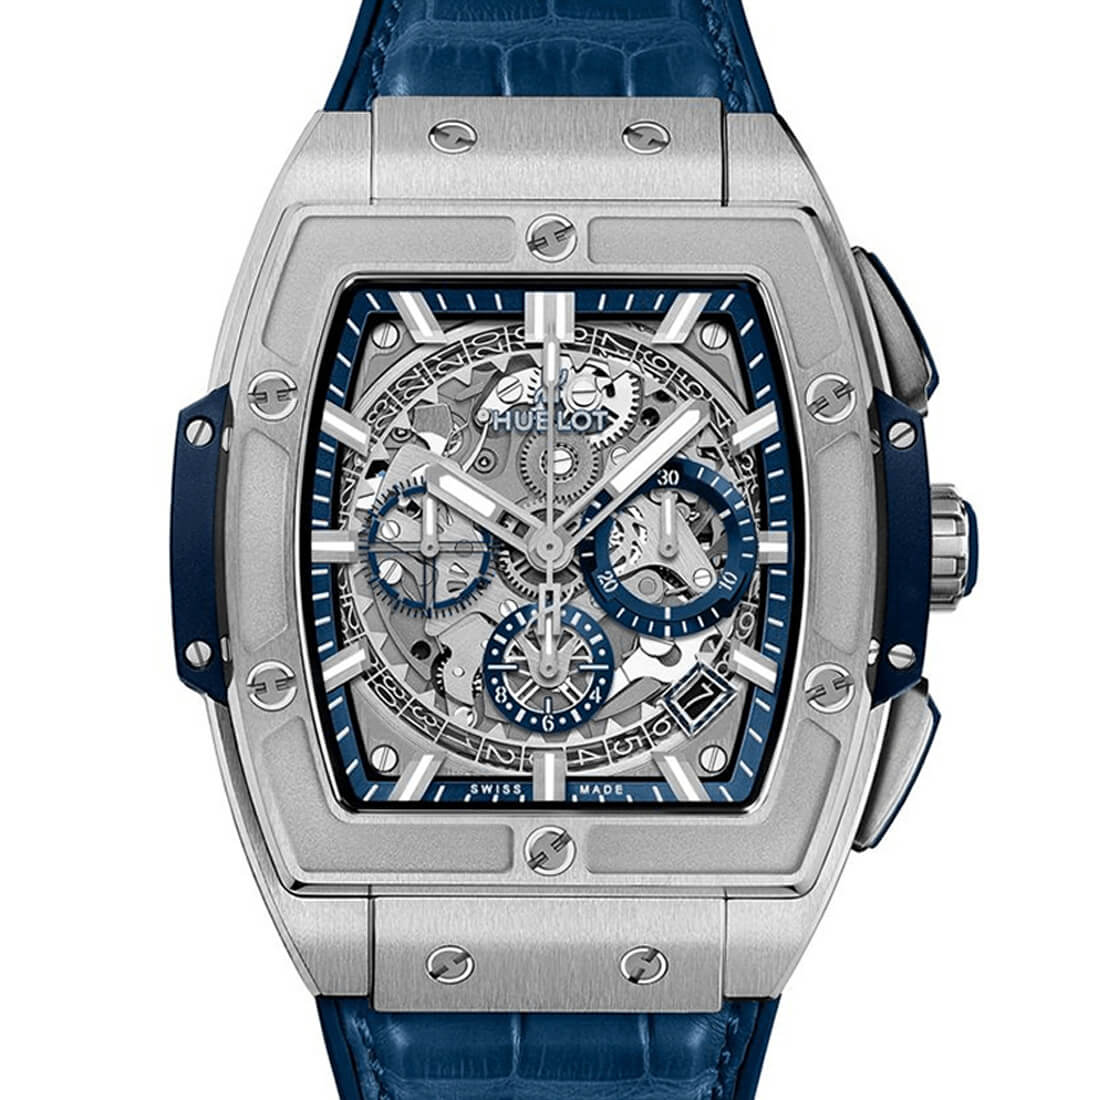 Buy online Best Quality 7a Copy Hublot Watch from watches for